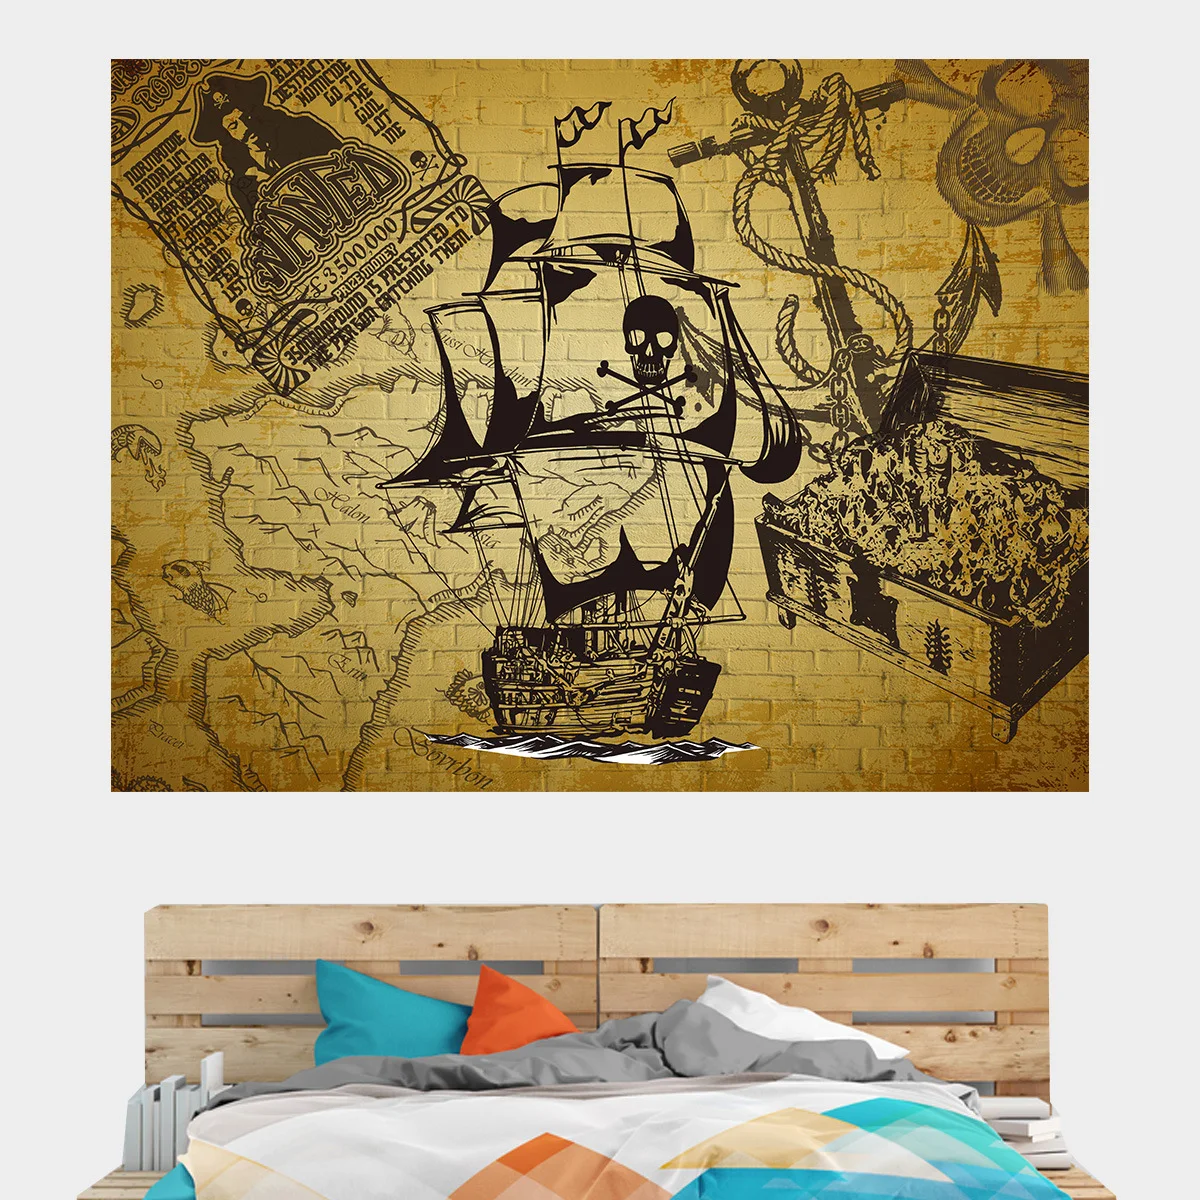 

Pirates of The Caribbean Movie Poster Wall Cloth Background Cloth Bar University Dormitory Room Bedroom Bedside Tapestry